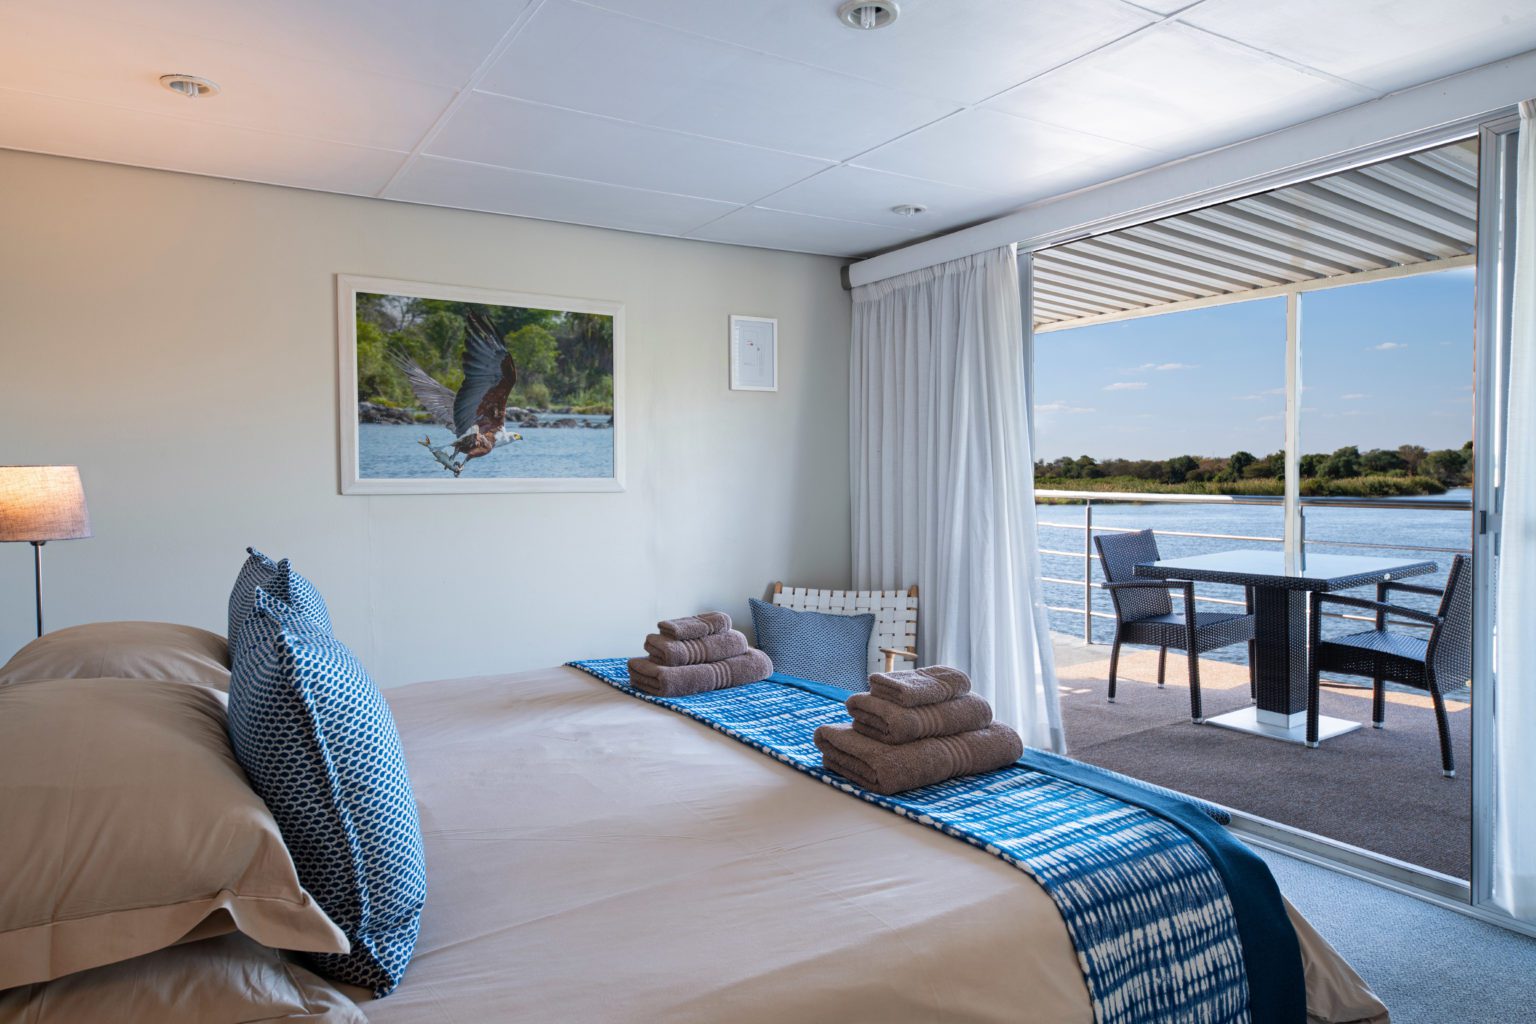 Chobe Princess boat cruise interior view from room with double bed